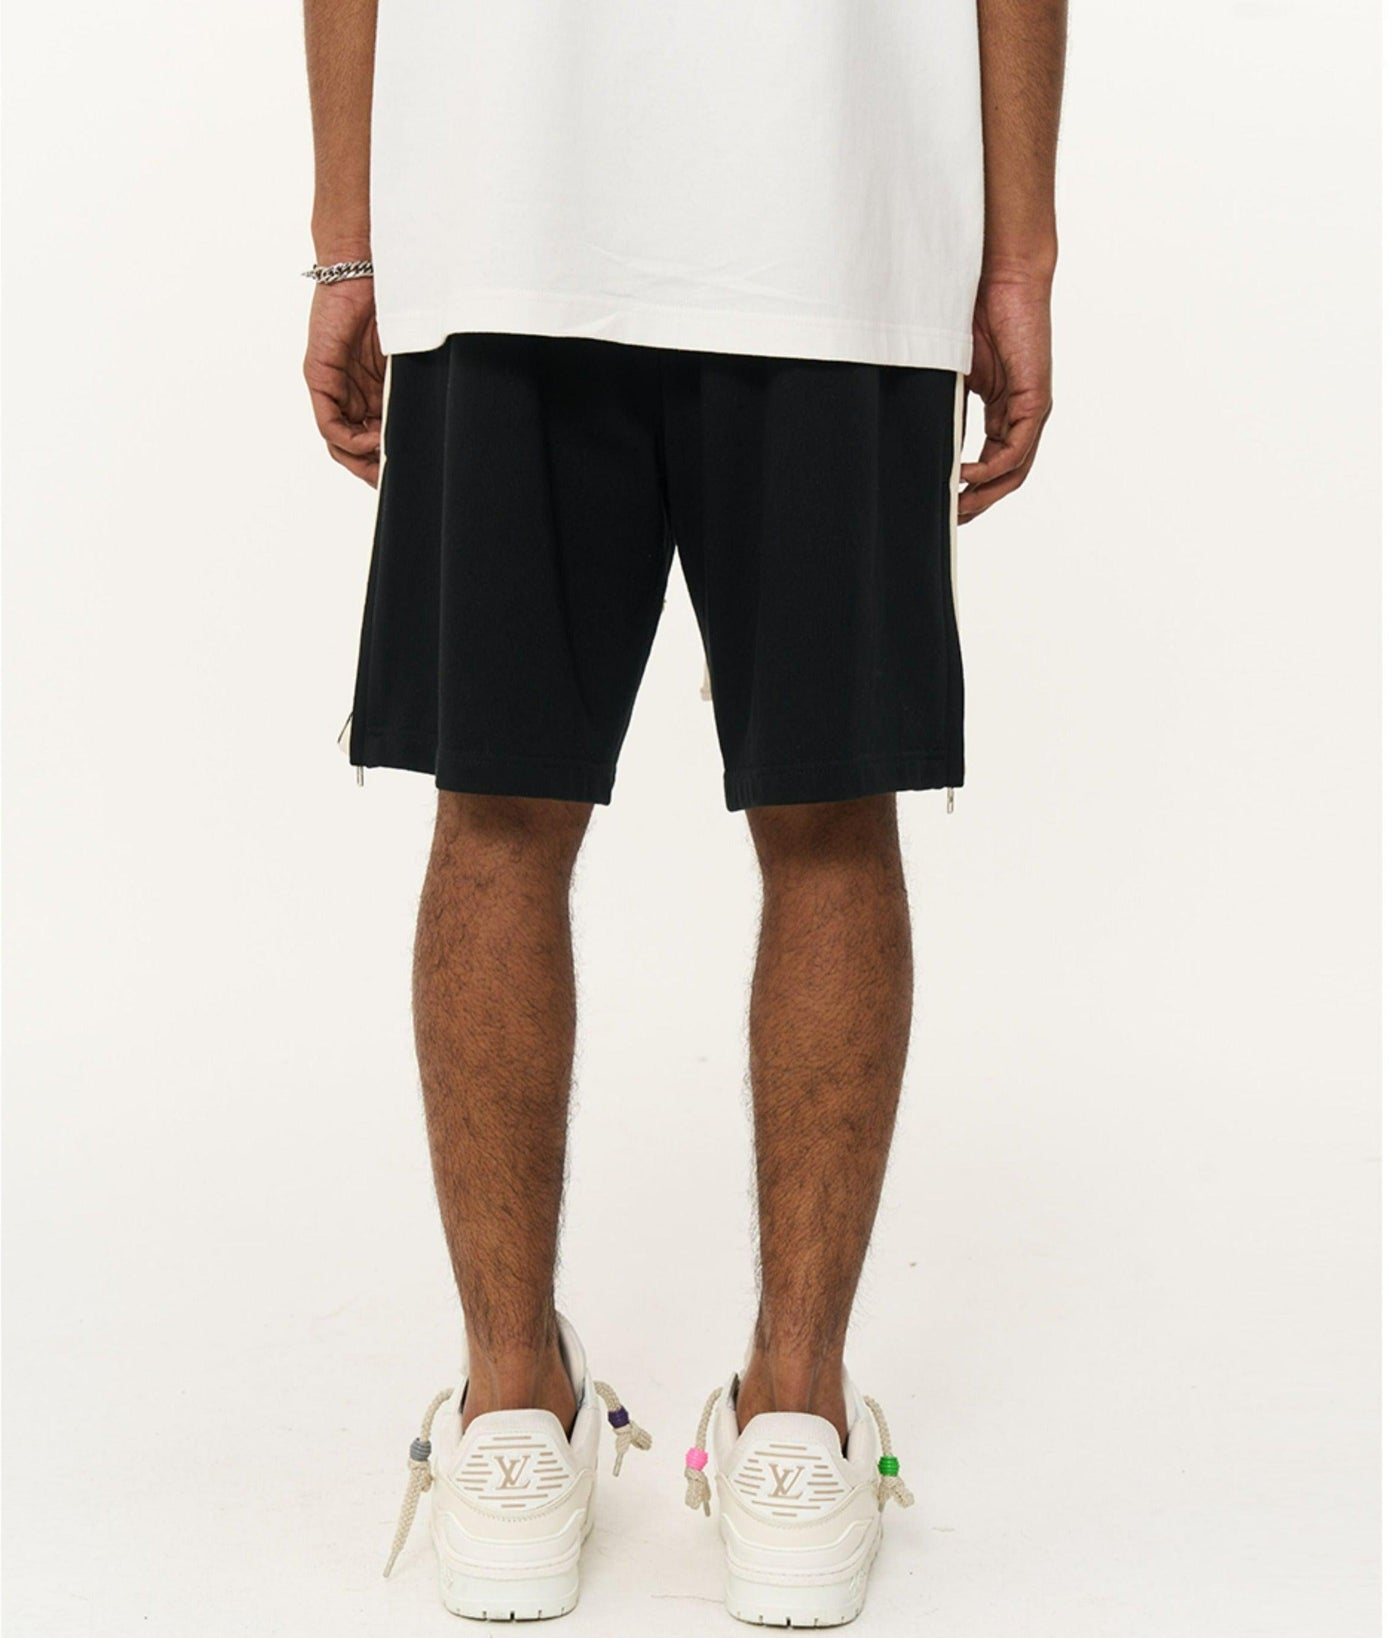 Adjustable Zip Sporty Shorts Korean Street Fashion Shorts By Harsh and Cruel Shop Online at OH Vault